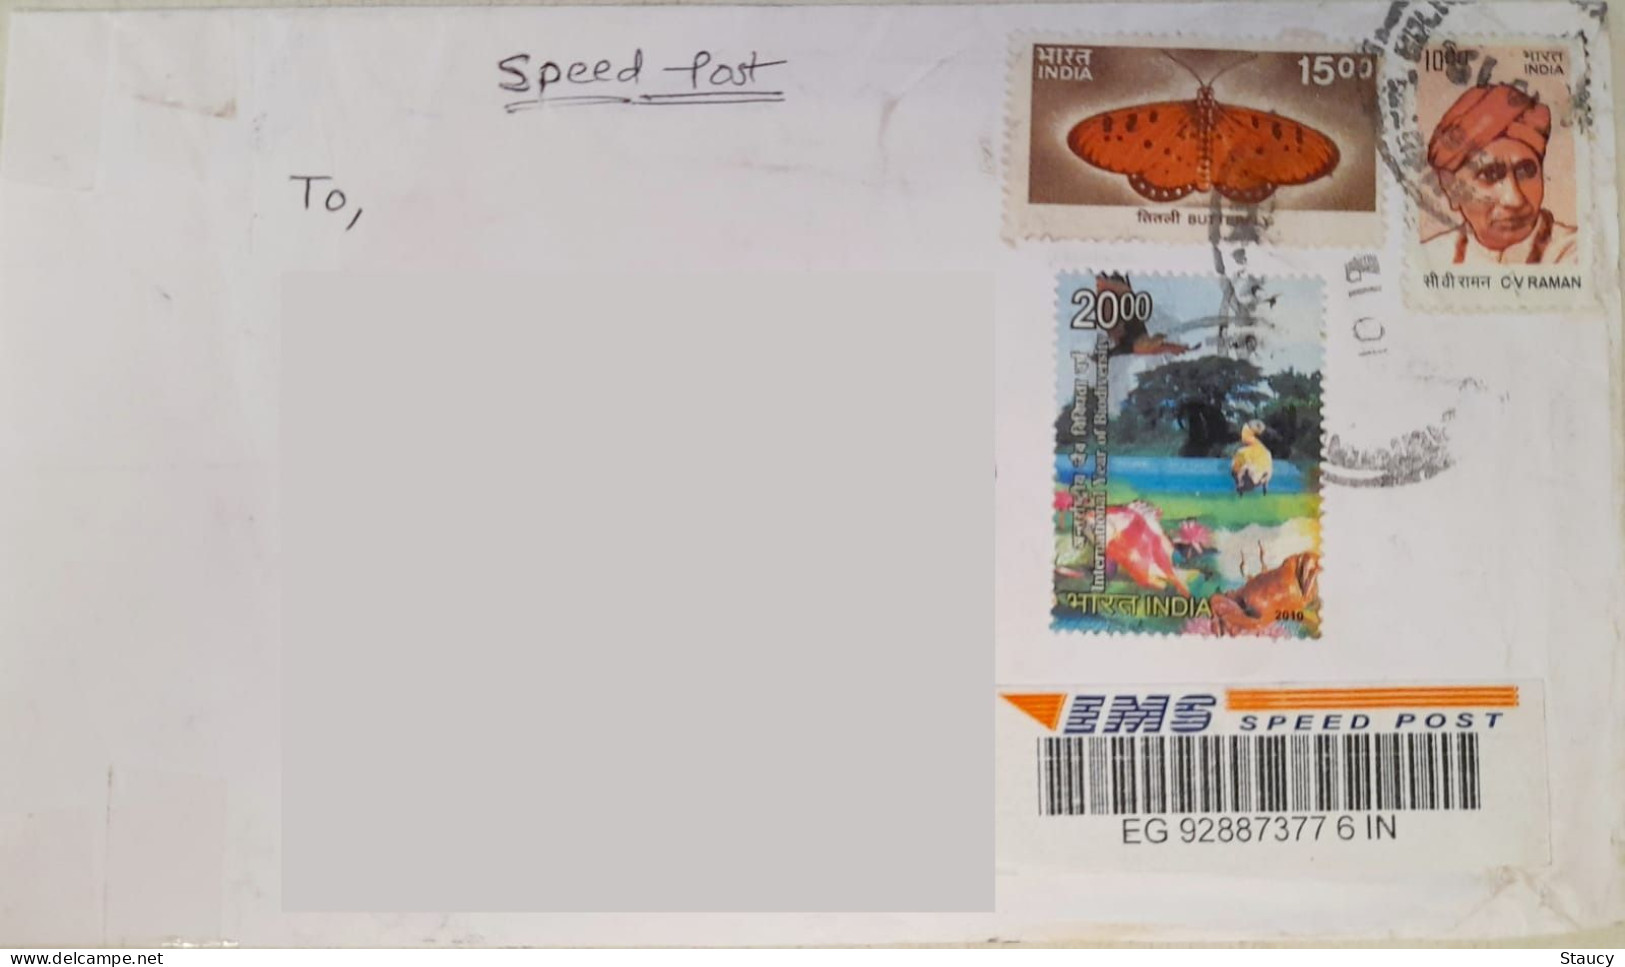 INDIA 2019 REGISTERED SPEED POST COVER Franked With BUTTERFLY, DUCK & C V RAMAN STAMP As Per Scan - Brieven En Documenten